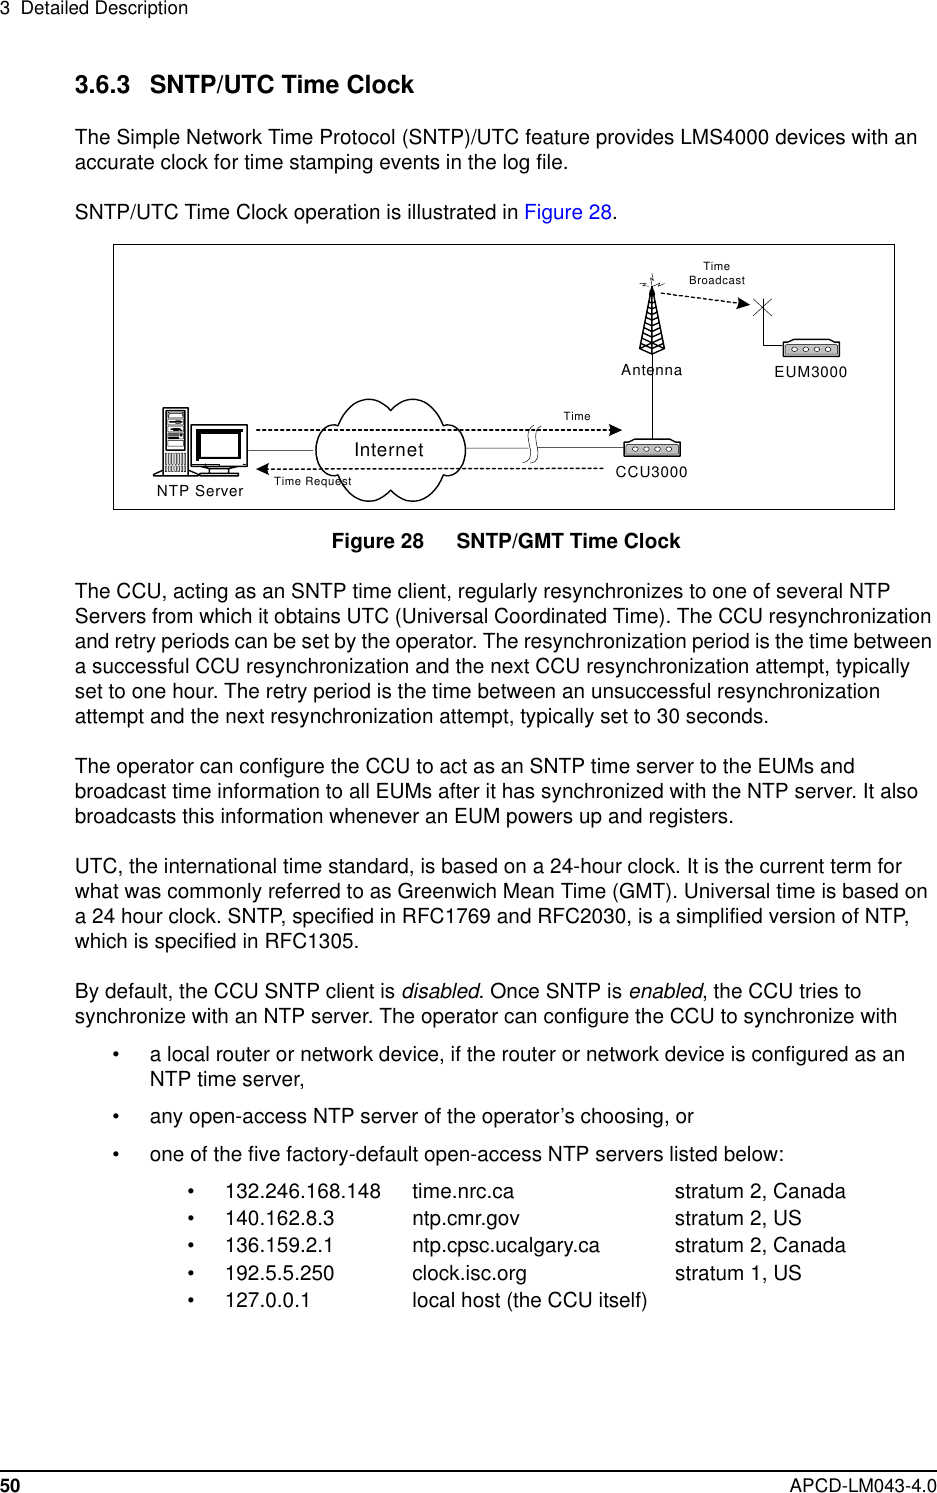 3 Detailed Description50 APCD-LM043-4.03.6.3 SNTP/UTC Time ClockThe Simple Network Time Protocol (SNTP)/UTC feature provides LMS4000 devices with anaccurate clock for time stamping events in the log file.SNTP/UTC Time Clock operation is illustrated in Figure 28.Figure 28 SNTP/GMT Time ClockThe CCU, acting as an SNTP time client, regularly resynchronizes to one of several NTPServers from which it obtains UTC (Universal Coordinated Time). The CCU resynchronizationand retry periods can be set by the operator. The resynchronization period is the time betweena successful CCU resynchronization and the next CCU resynchronization attempt, typicallyset to one hour. The retry period is the time between an unsuccessful resynchronizationattempt and the next resynchronization attempt, typically set to 30 seconds.The operator can configure the CCU to act as an SNTP time server to the EUMs andbroadcast time information to all EUMs after it has synchronized with the NTP server. It alsobroadcasts this information whenever an EUM powers up and registers.UTC, the international time standard, is based on a 24-hour clock. It is the current term forwhat was commonly referred to as Greenwich Mean Time (GMT). Universal time is based ona 24 hour clock. SNTP, specified in RFC1769 and RFC2030, is a simplified version of NTP,which is specified in RFC1305.By default, the CCU SNTP client is disabled.OnceSNTPisenabled, the CCU tries tosynchronize with an NTP server. The operator can configure the CCU to synchronize with• a local router or network device, if the router or network device is configured as anNTP time server,• any open-access NTP server of the operator’s choosing, or• one of the five factory-default open-access NTP servers listed below:• 132.246.168.148 time.nrc.ca stratum 2, Canada• 140.162.8.3 ntp.cmr.gov stratum 2, US• 136.159.2.1 ntp.cpsc.ucalgary.ca stratum 2, Canada• 192.5.5.250 clock.isc.org stratum 1, US• 127.0.0.1 local host (the CCU itself)CCU3000Antenna EUM3000NTP ServerInternetTime RequestTimeTimeBroadcast